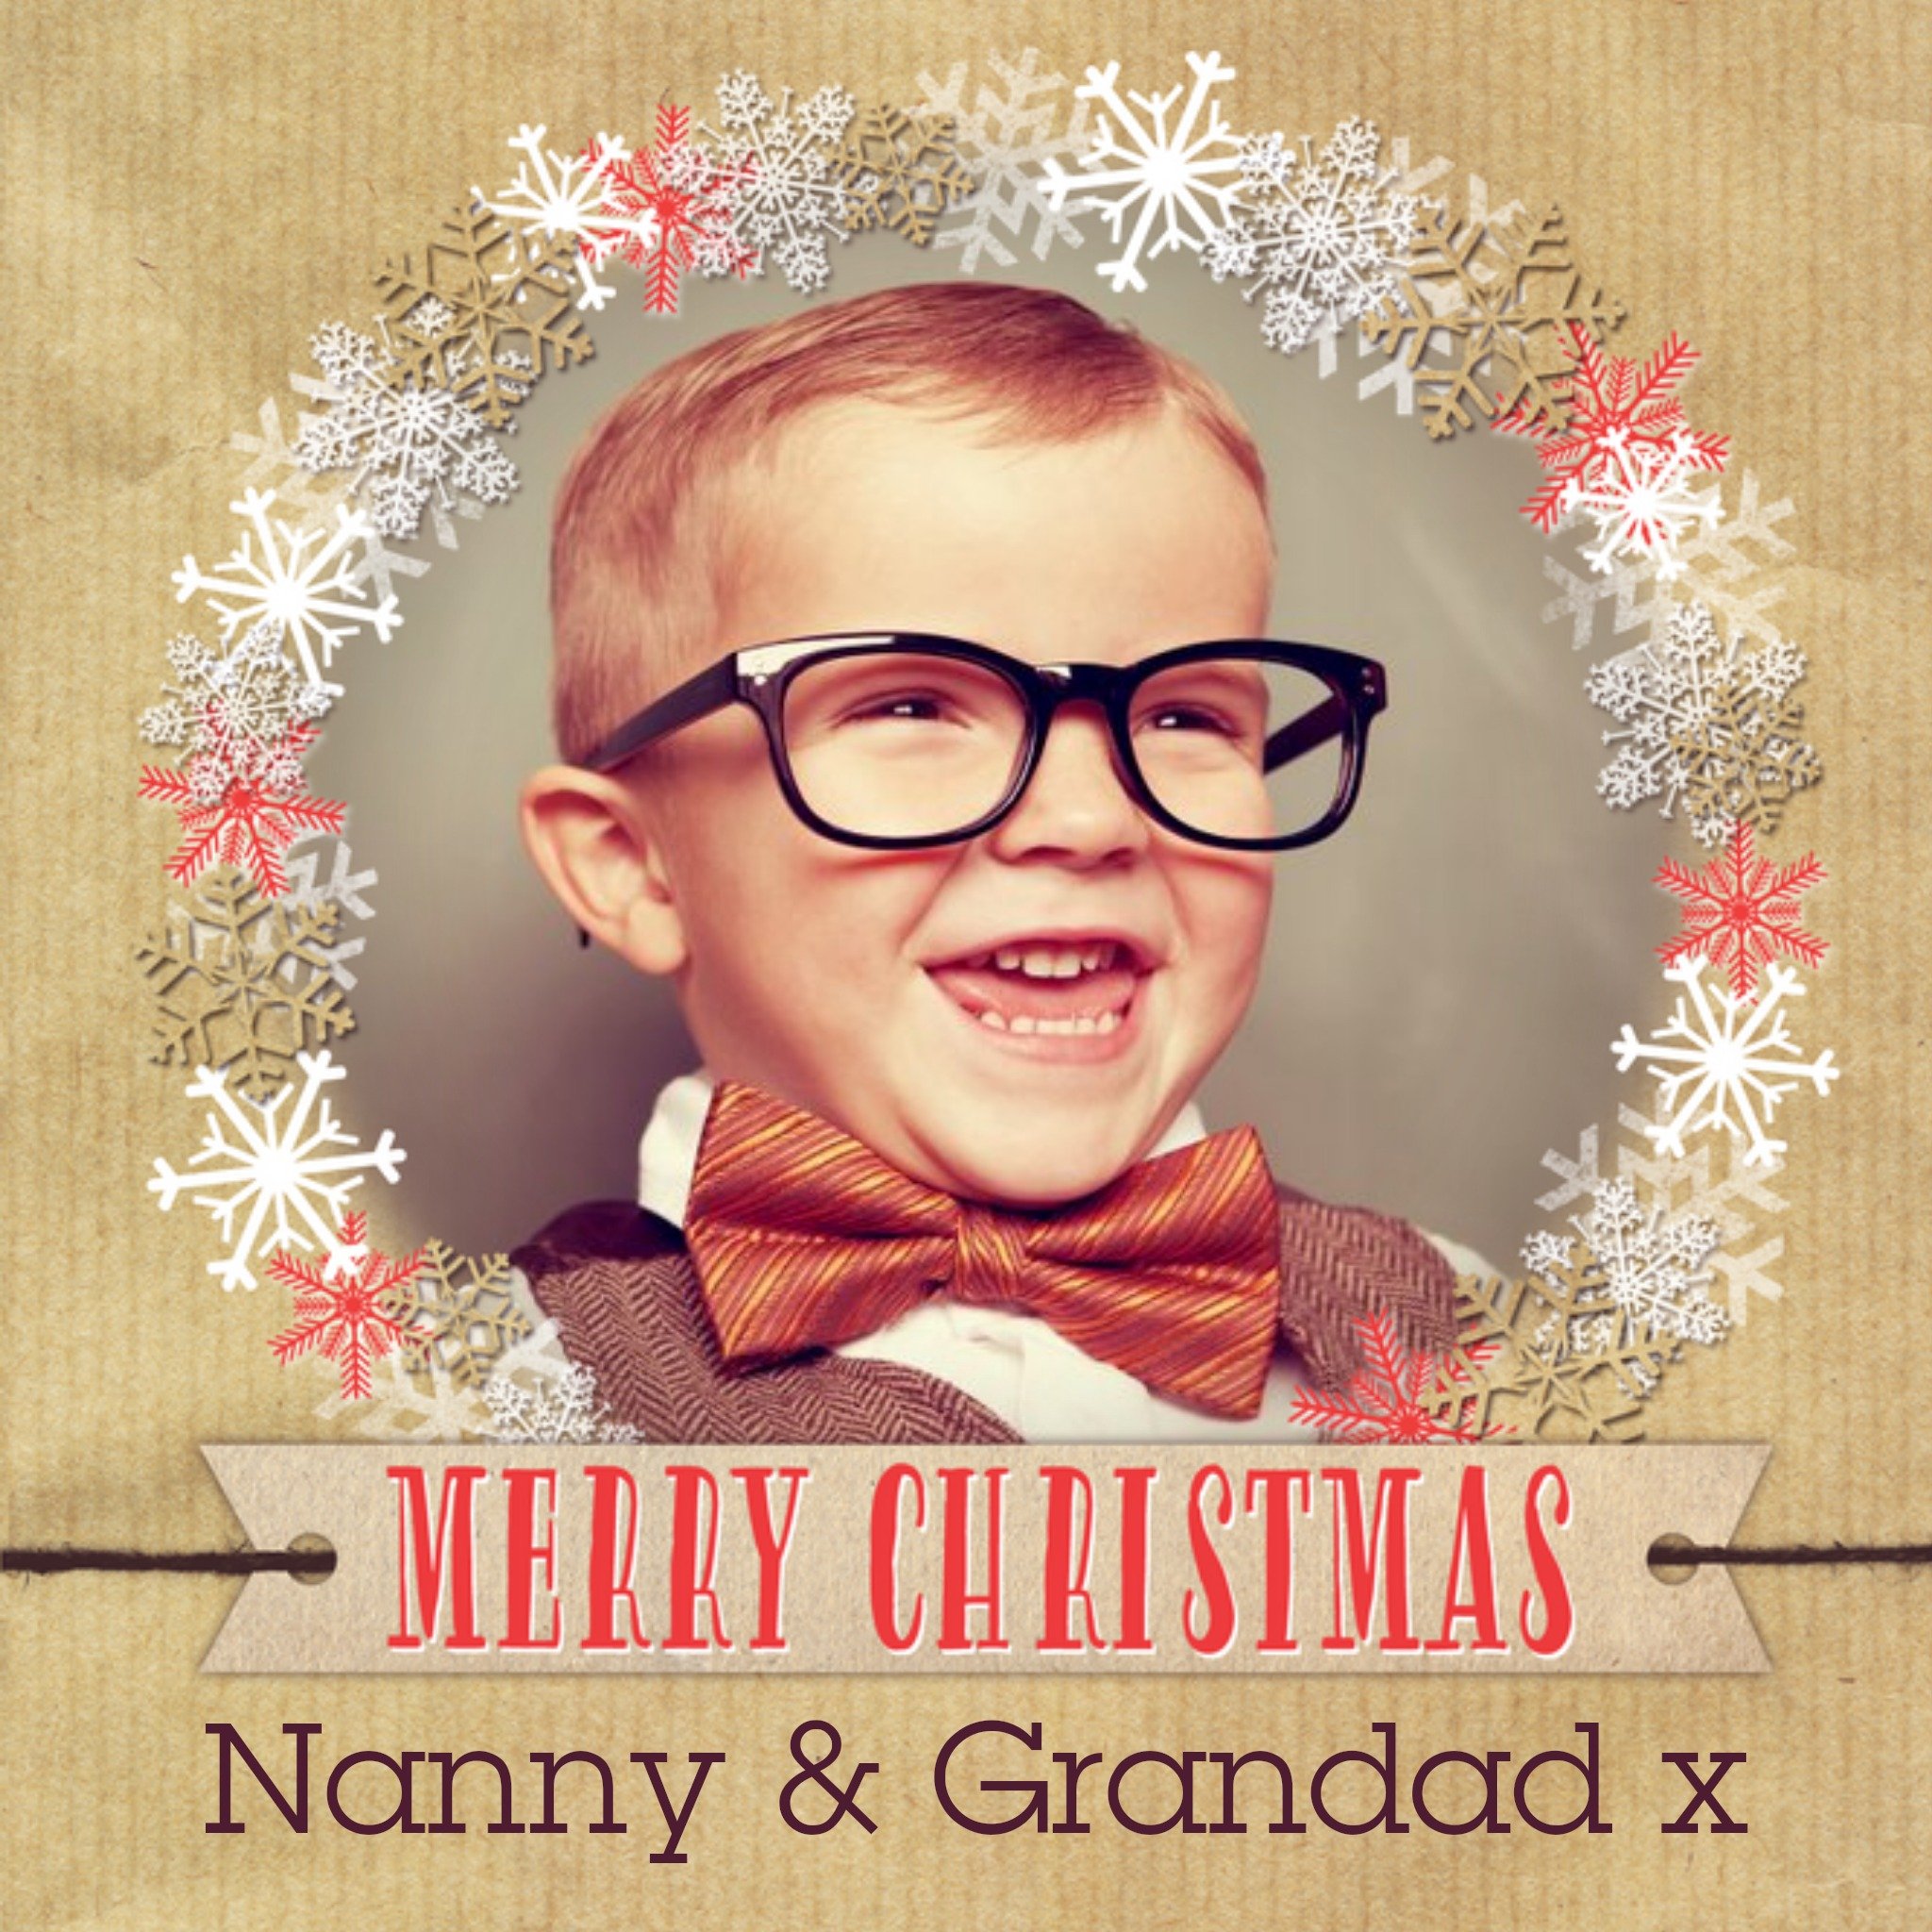 Moonpig Merry Christmas Card For Grandparents, Large